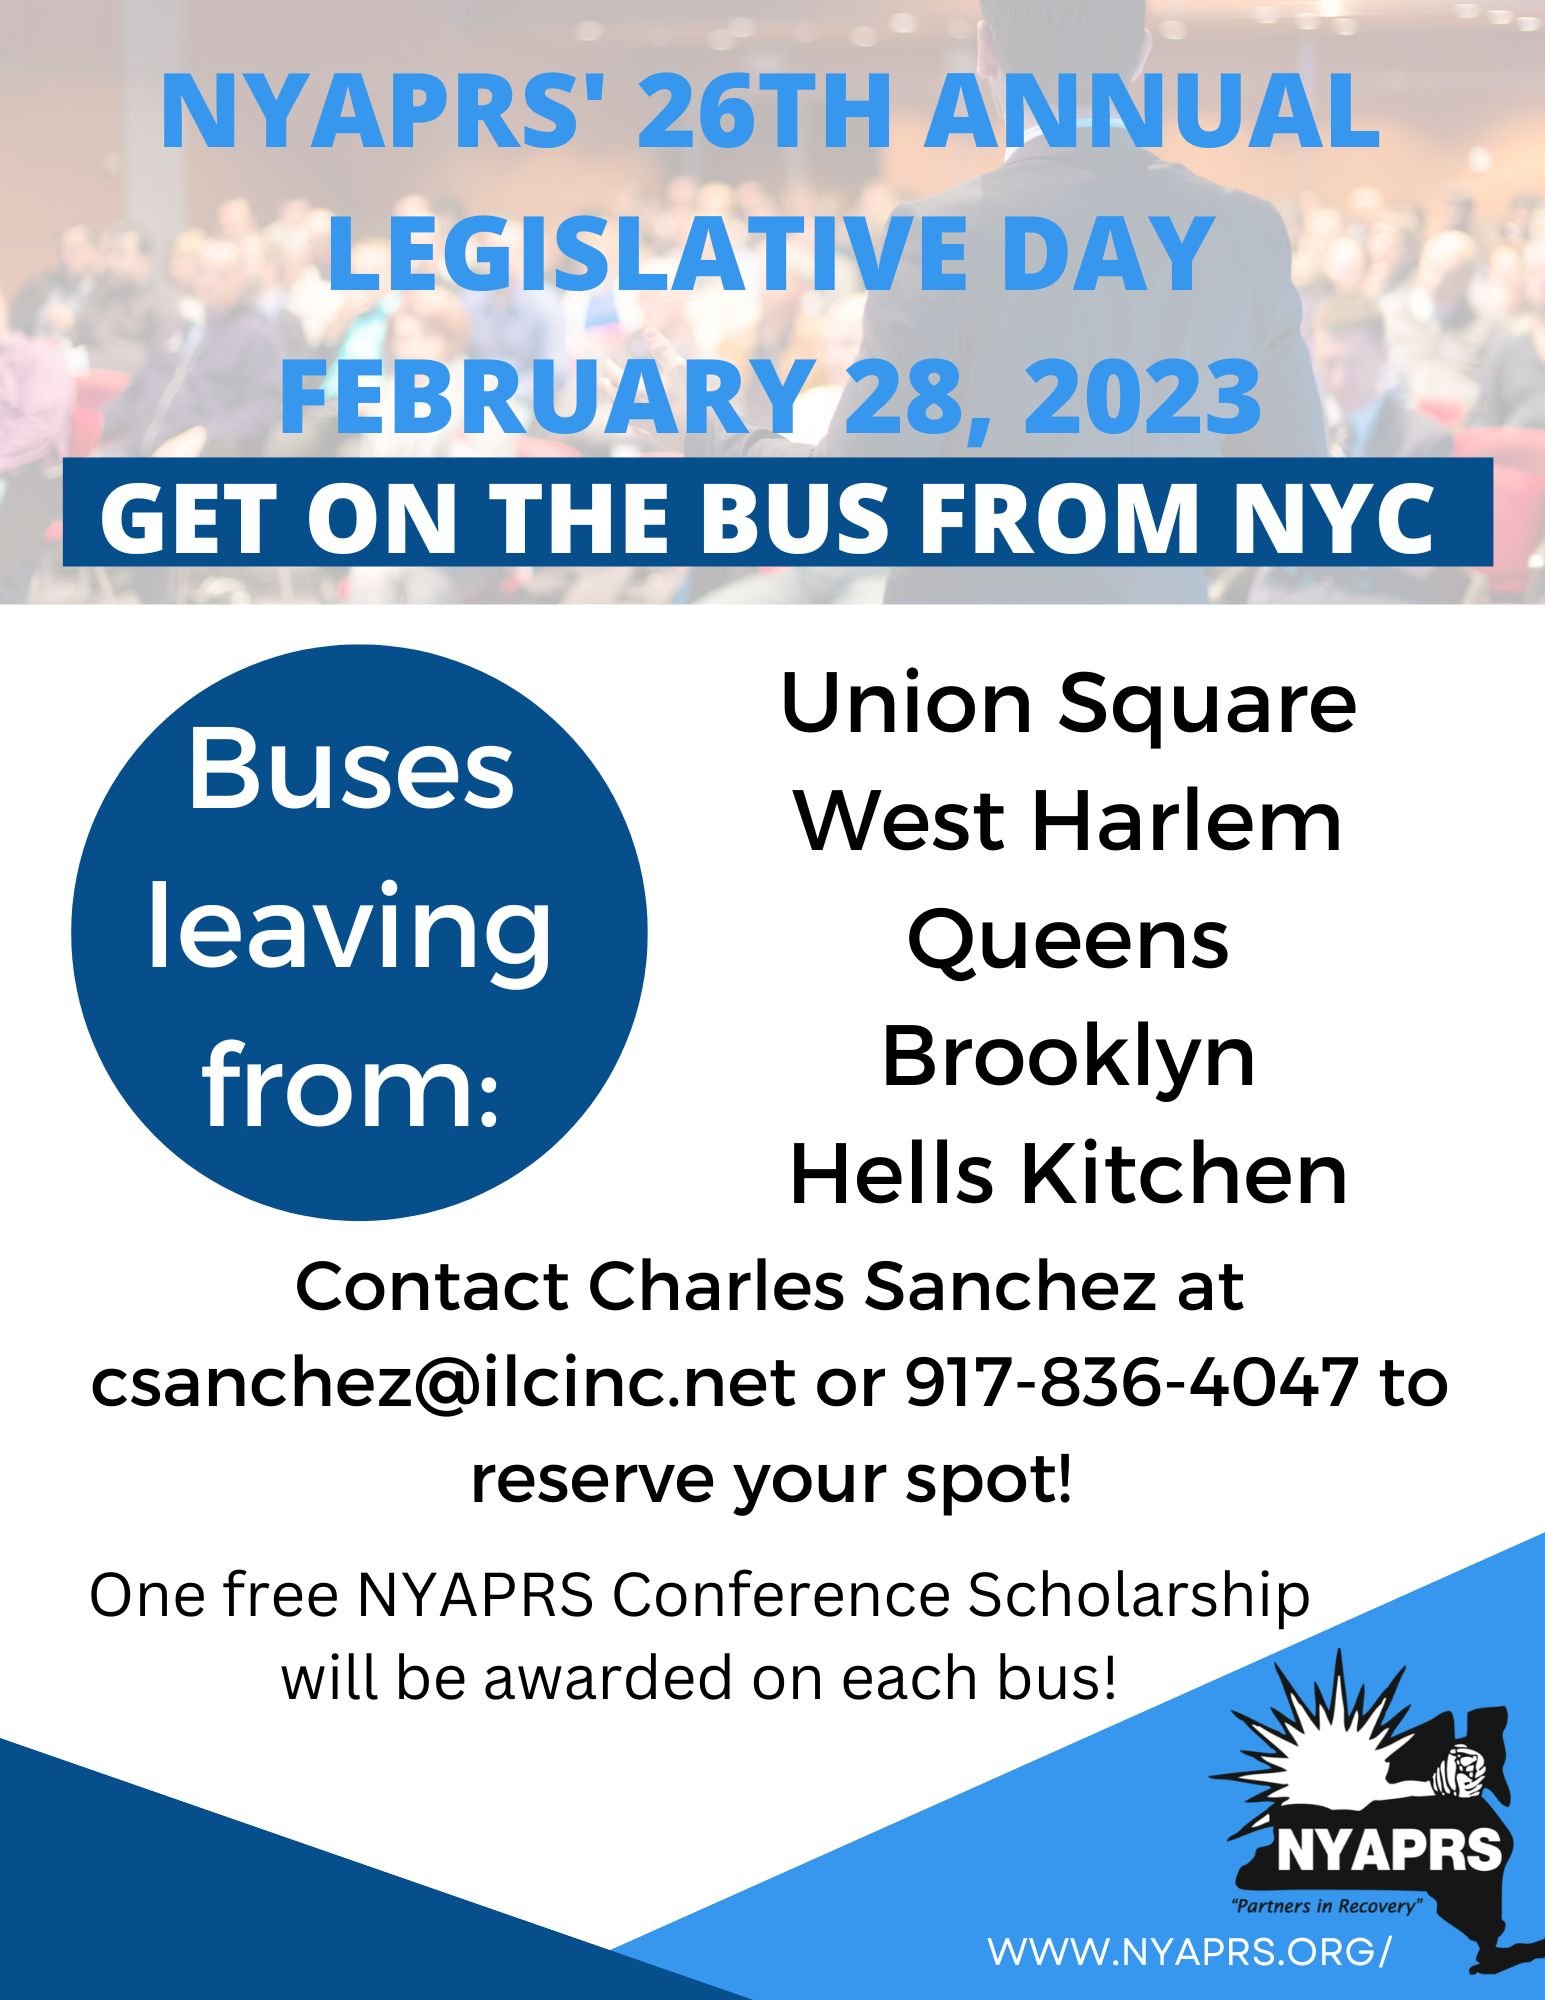 Get on the bus! NYC ICL.jpg